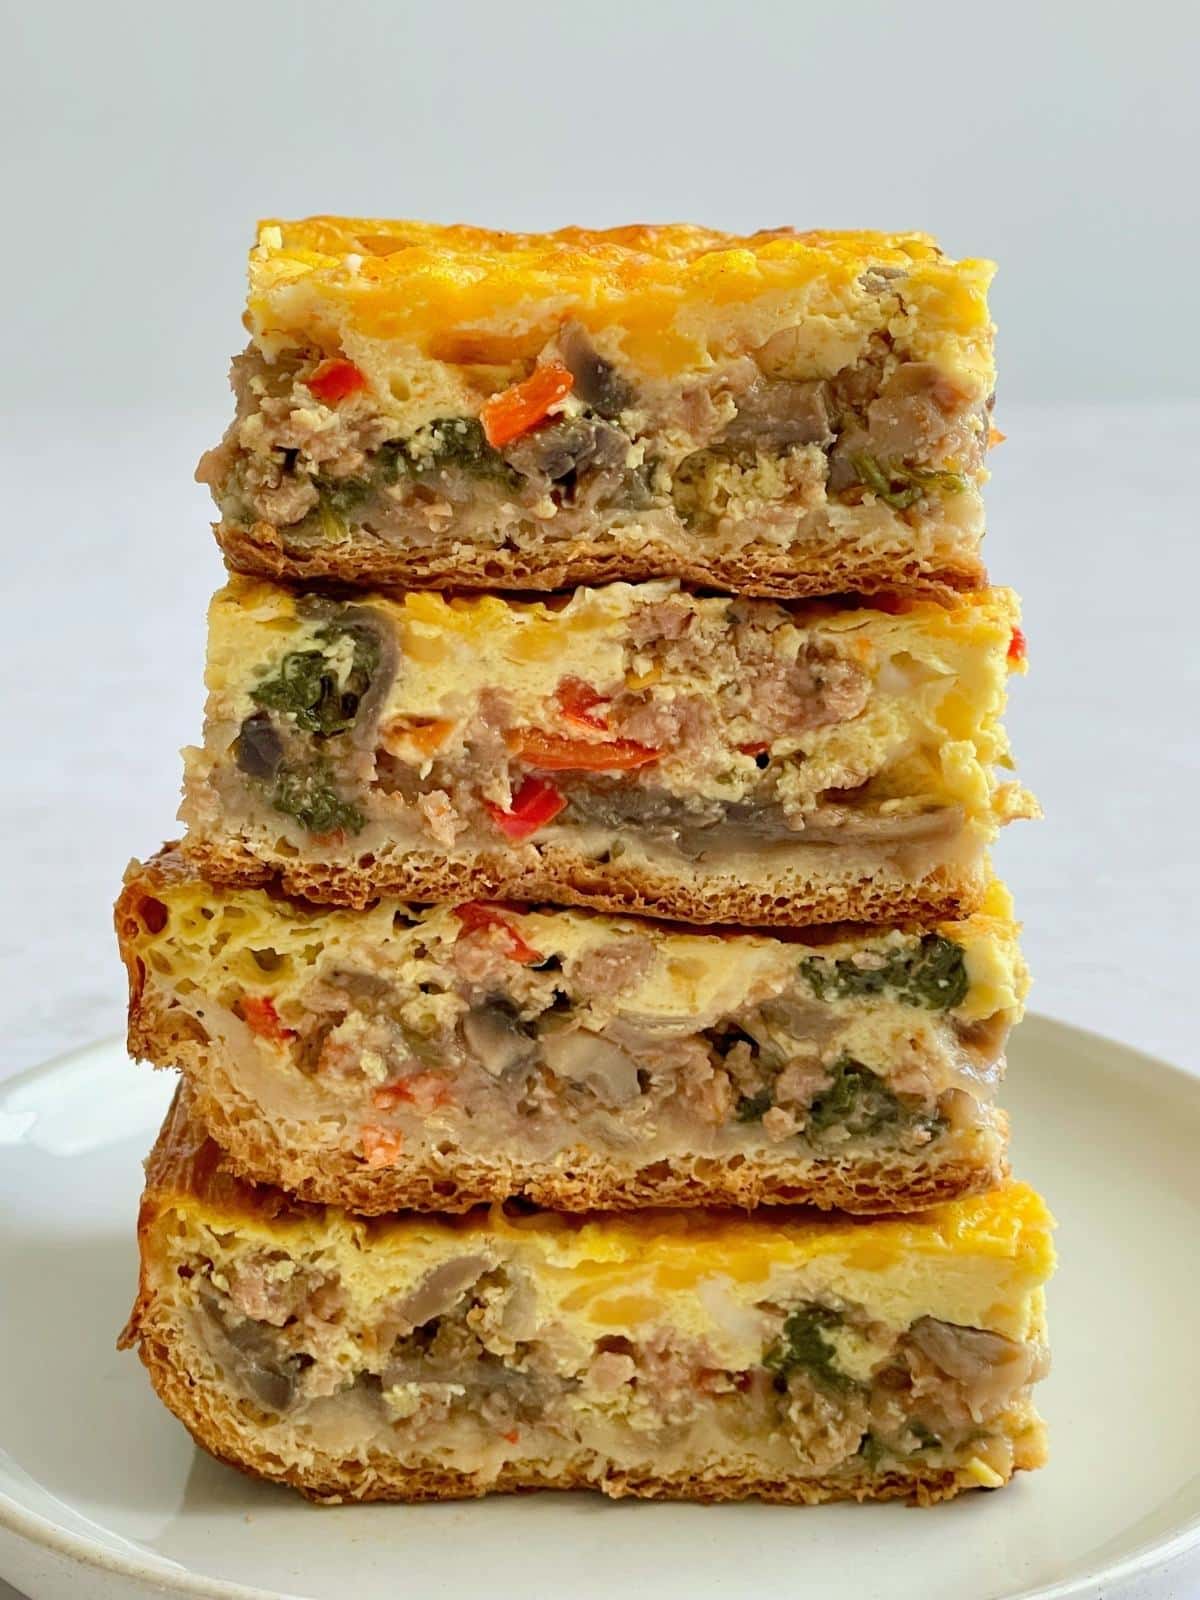 Stacked egg casserole slices.